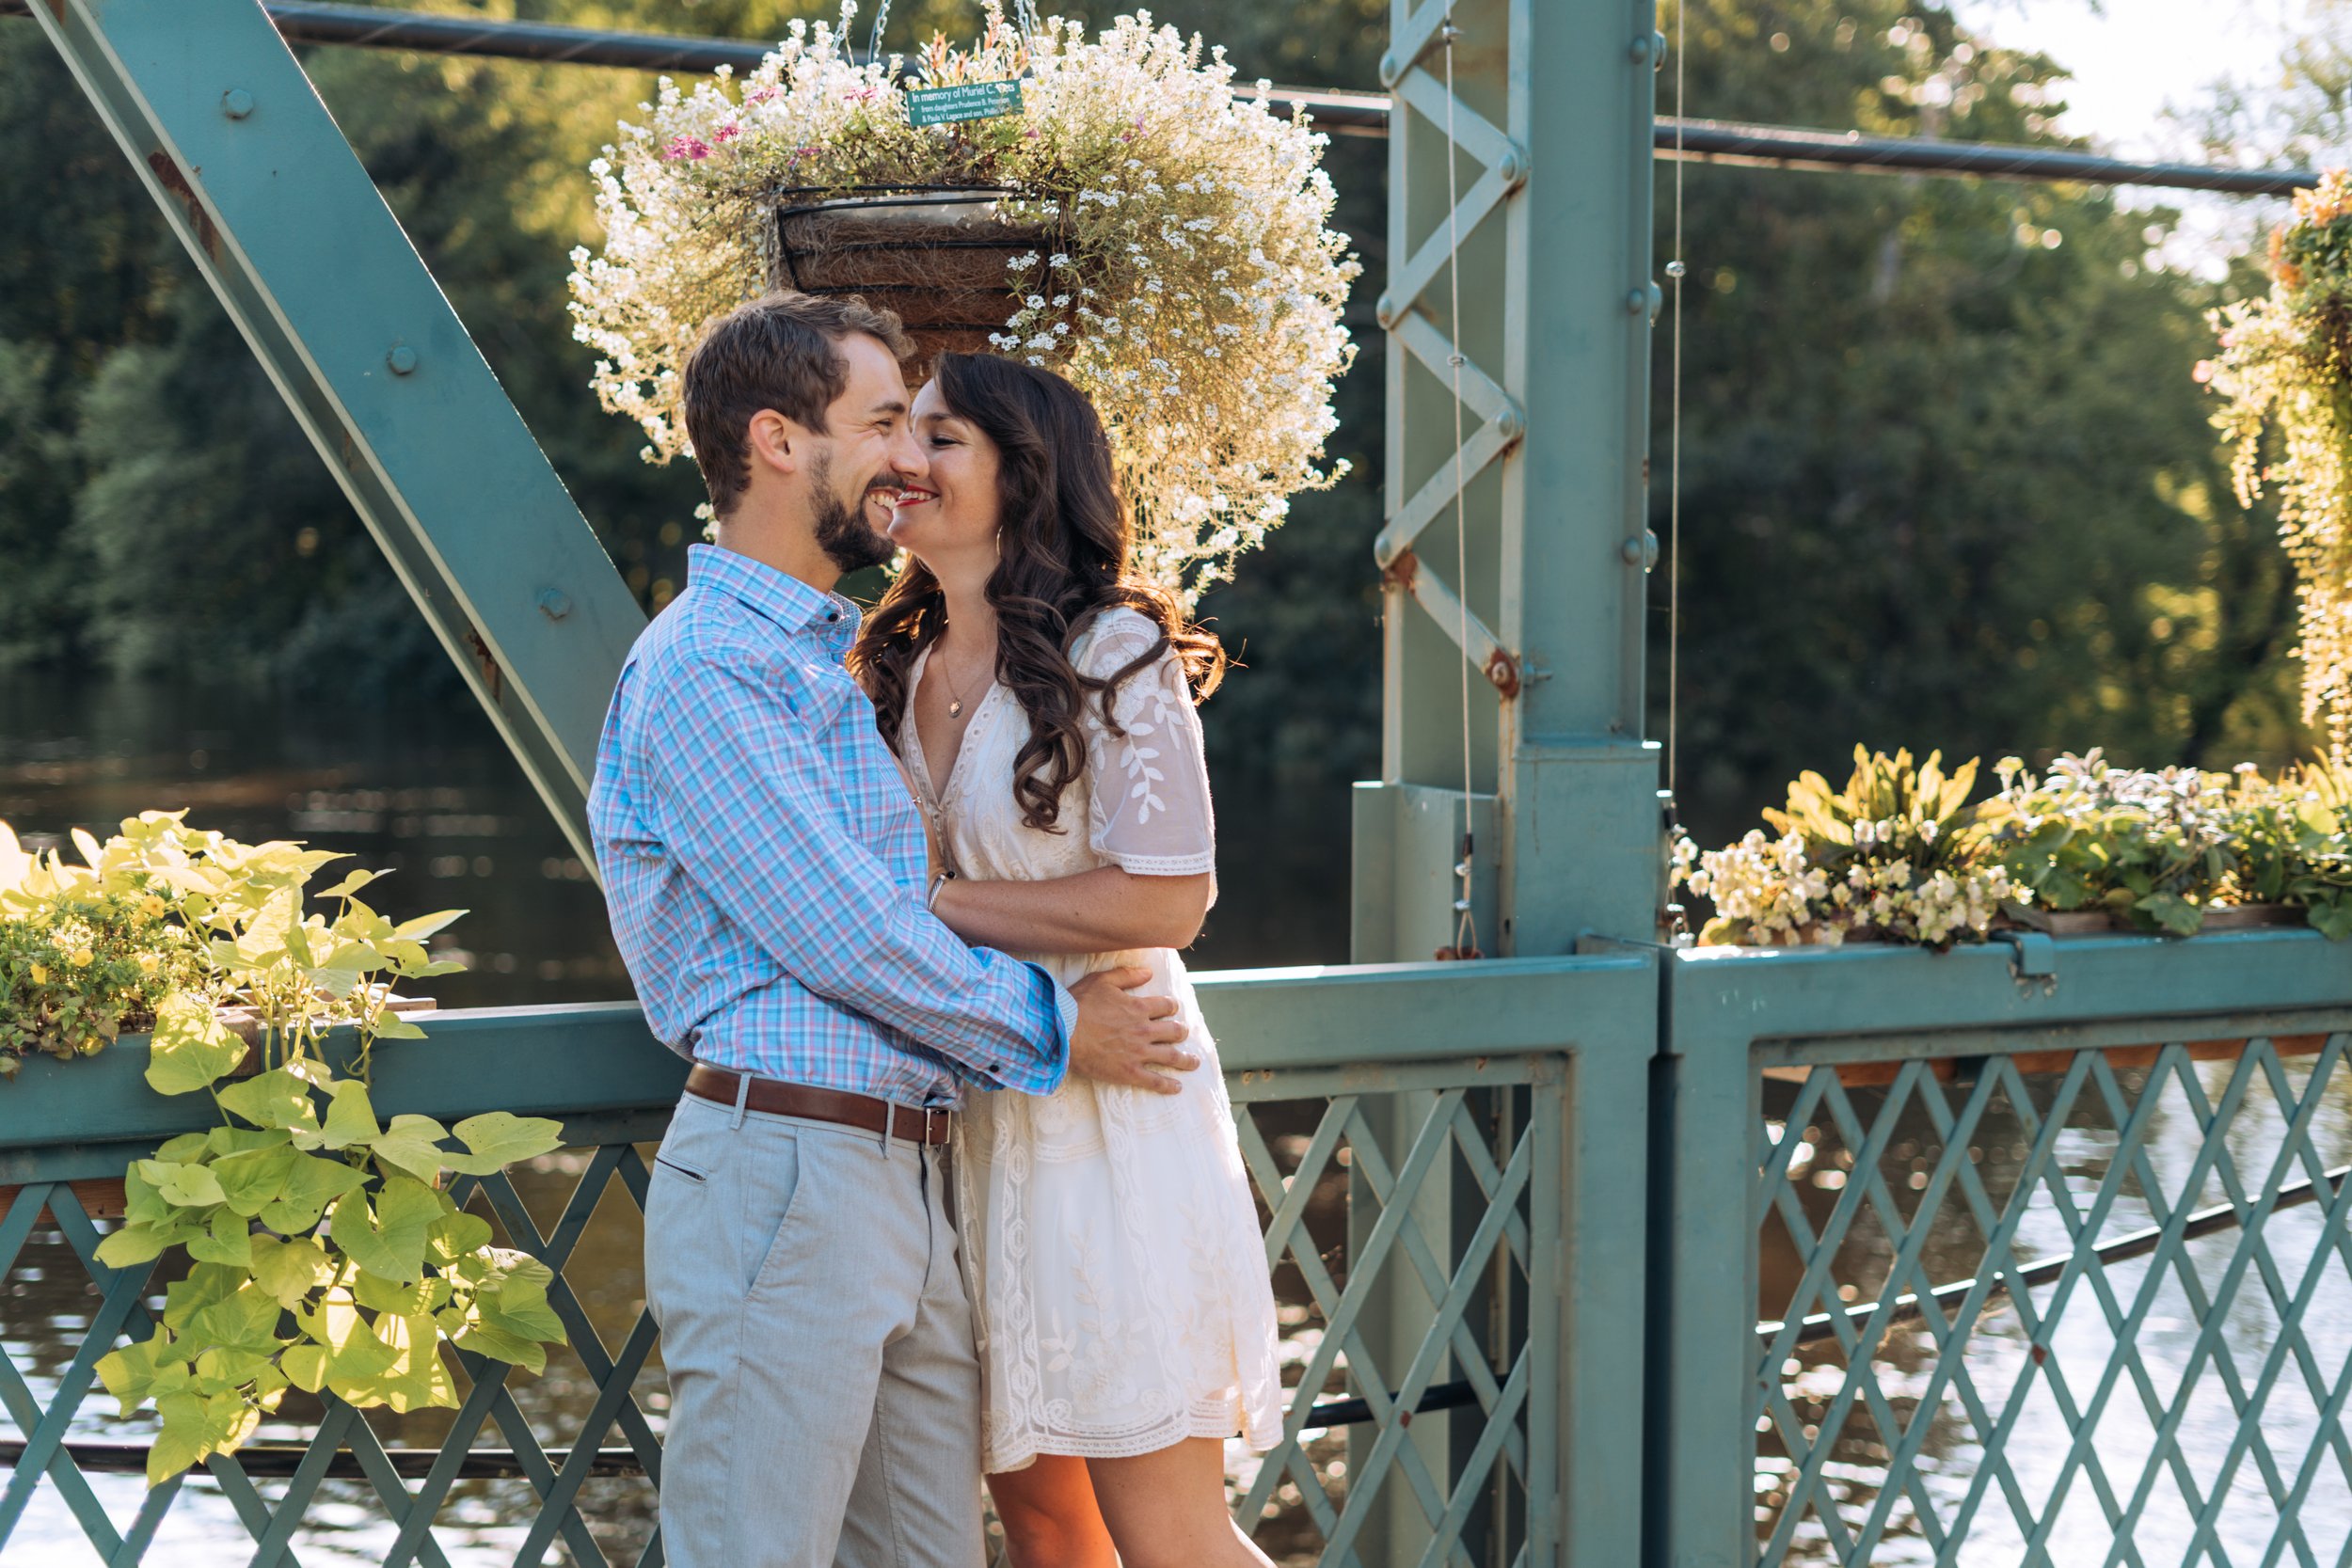 A straight white couple hugs on the Drake Hill Flower Bridge in Simsbury. The bridge is blue. The man is wearing a blue shirt and the woman is wearing a short white dress.